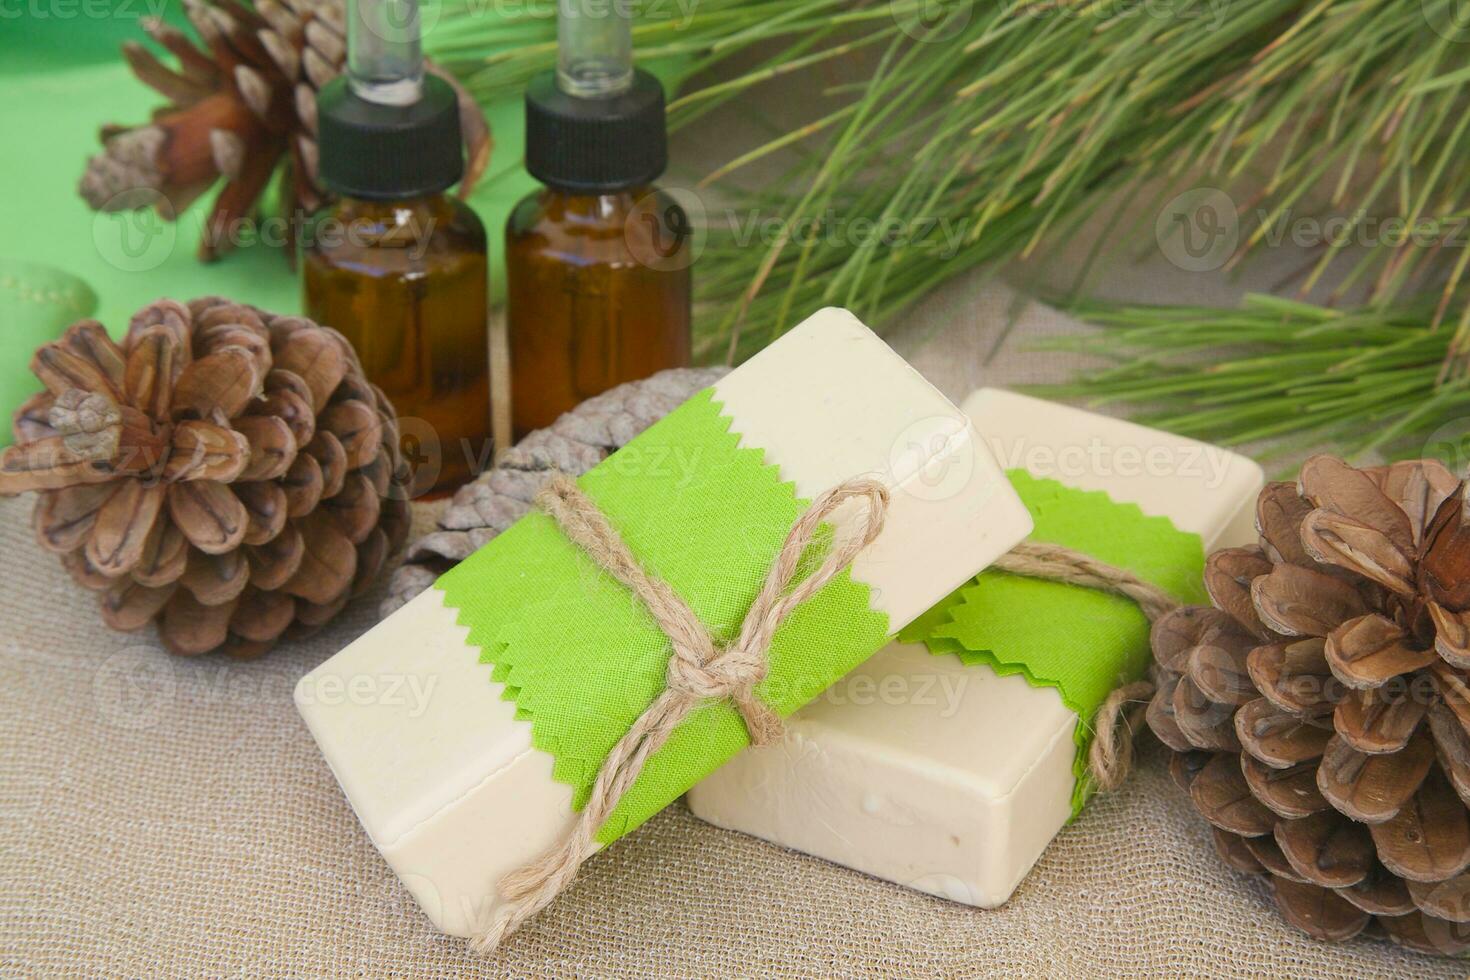 Soap with pine tree essential oil photo